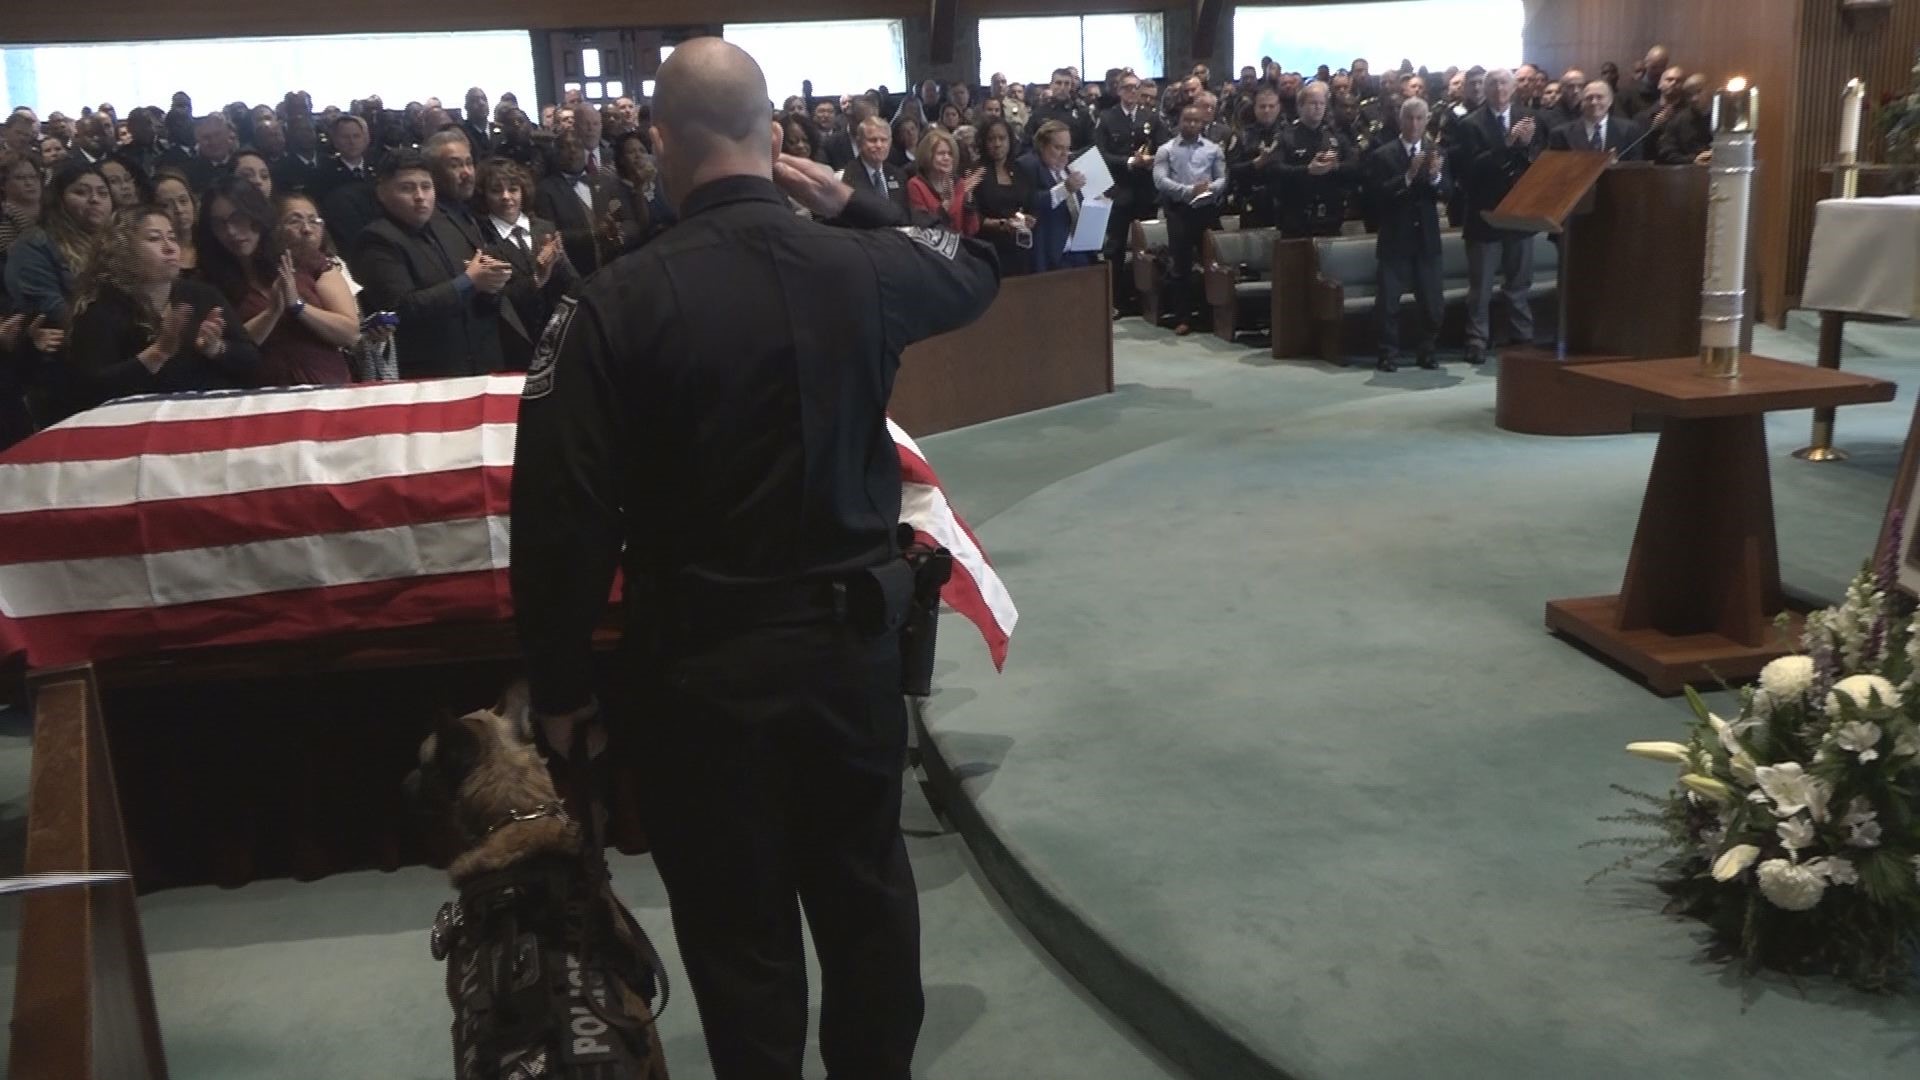 Police K9 Indi made an appearance at the funeral for a fallen DeKalb County officer on December 18, 2018.